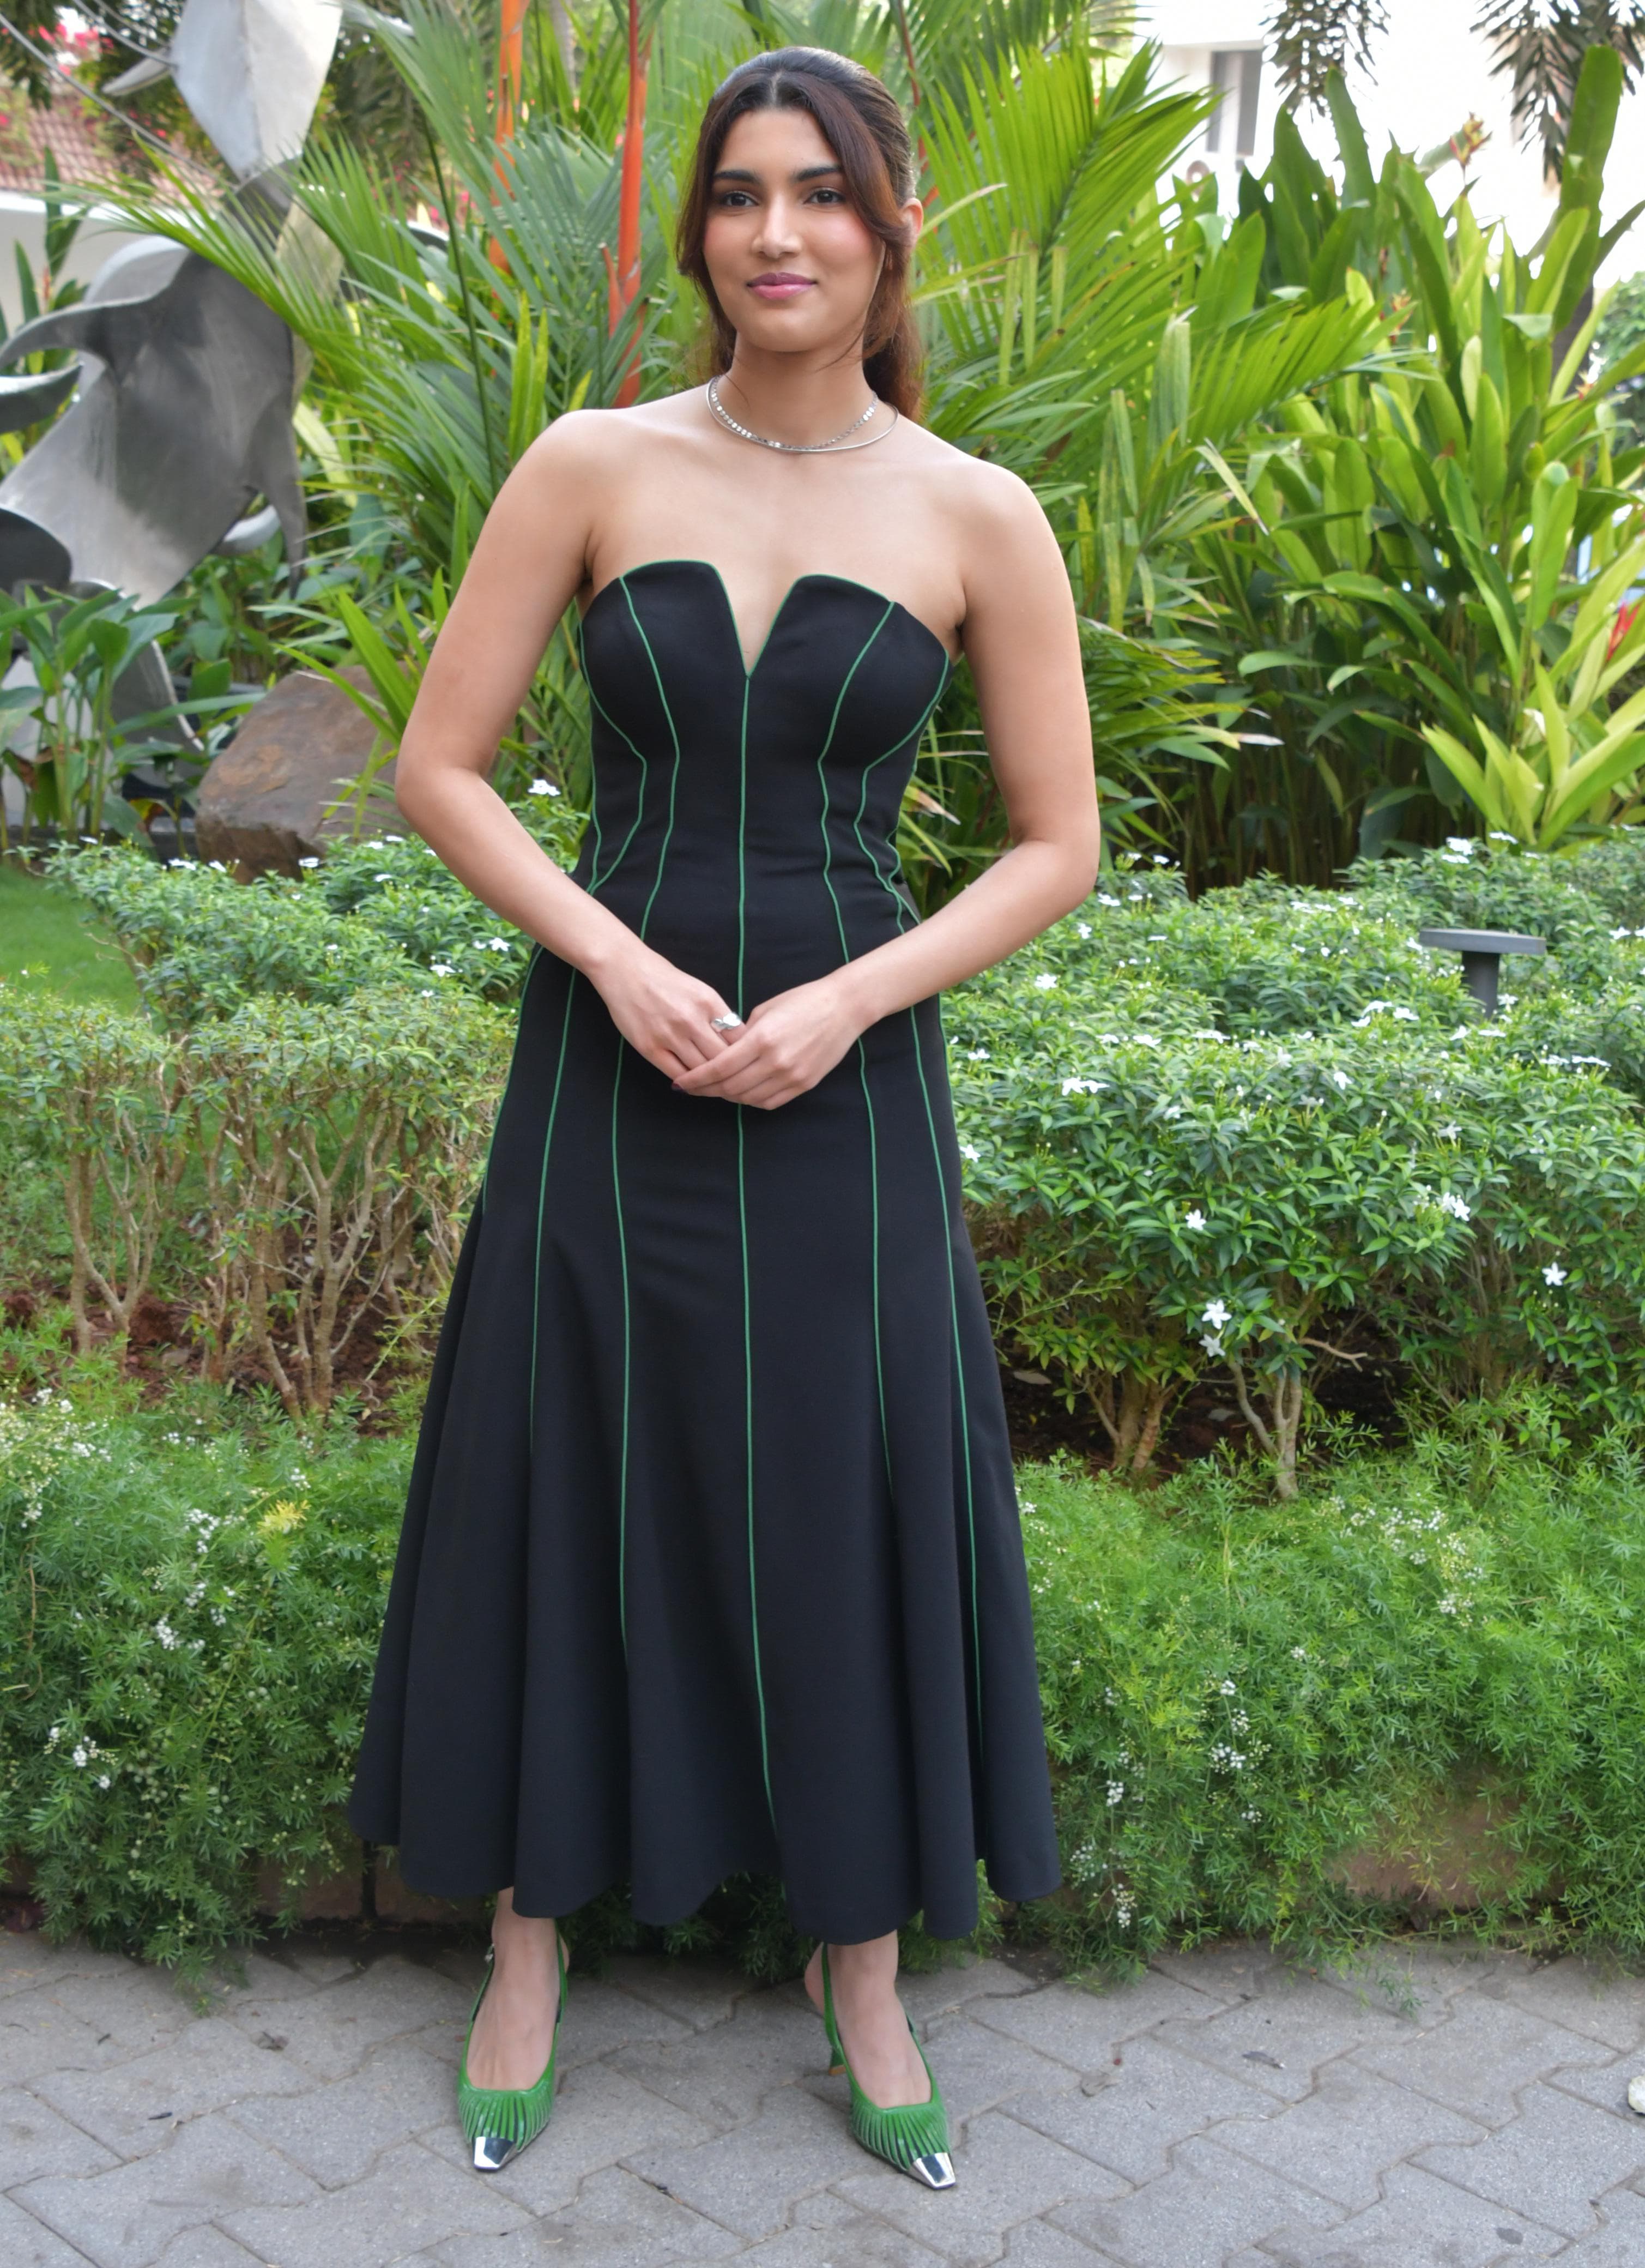 Alizeh Agnihotri looked stunning in a strapless gown as she got clicked